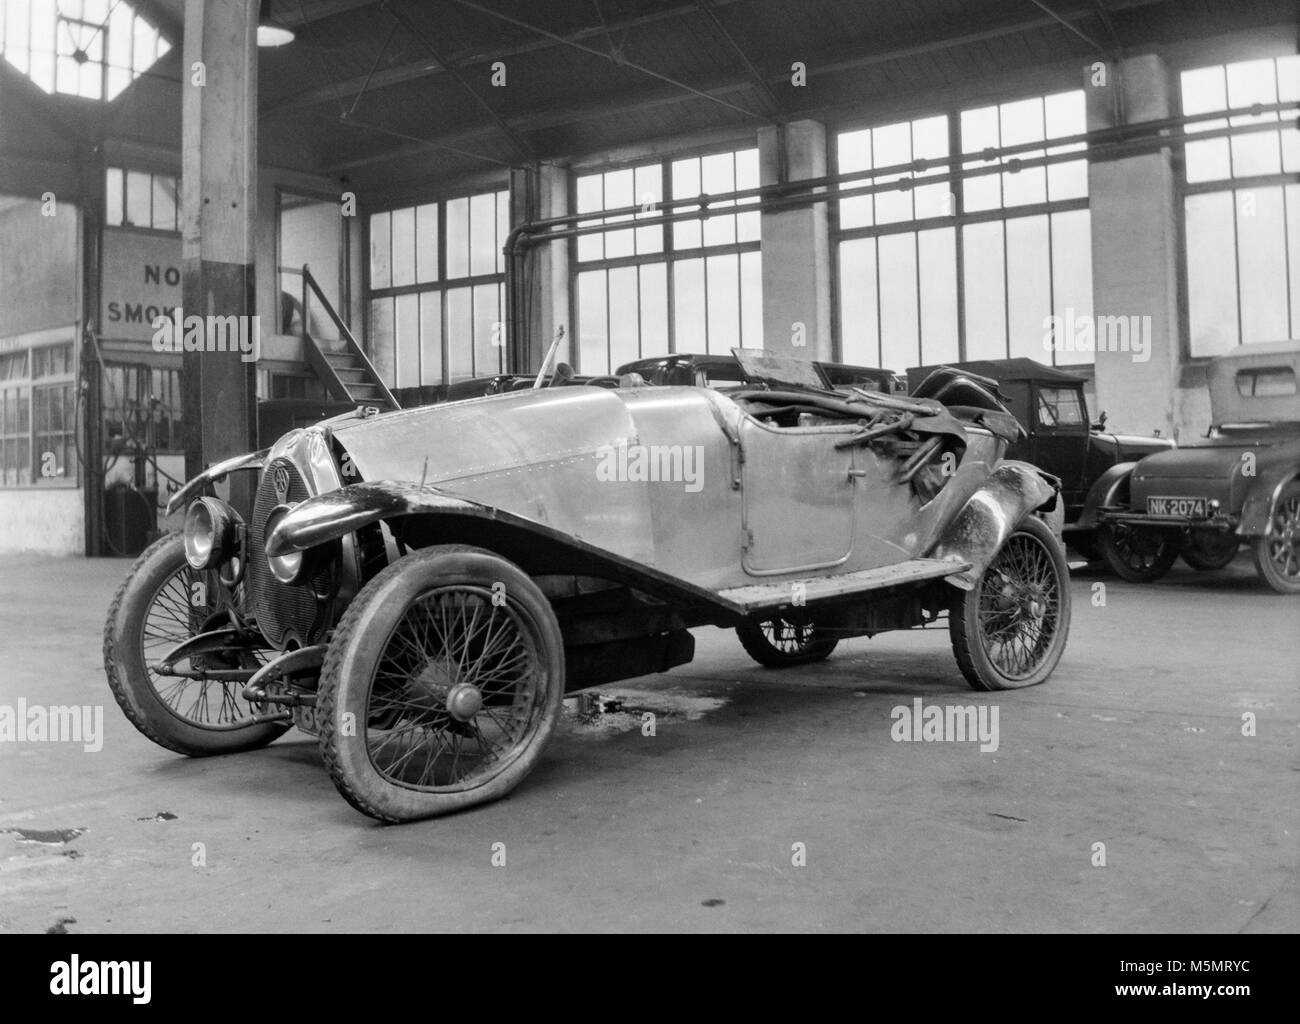 Vintage Bugatti Type 23 Brescia car, licence number XU 8943, in a garage after an accident. Photo taken in the UK around the 1920s. Stock Photo